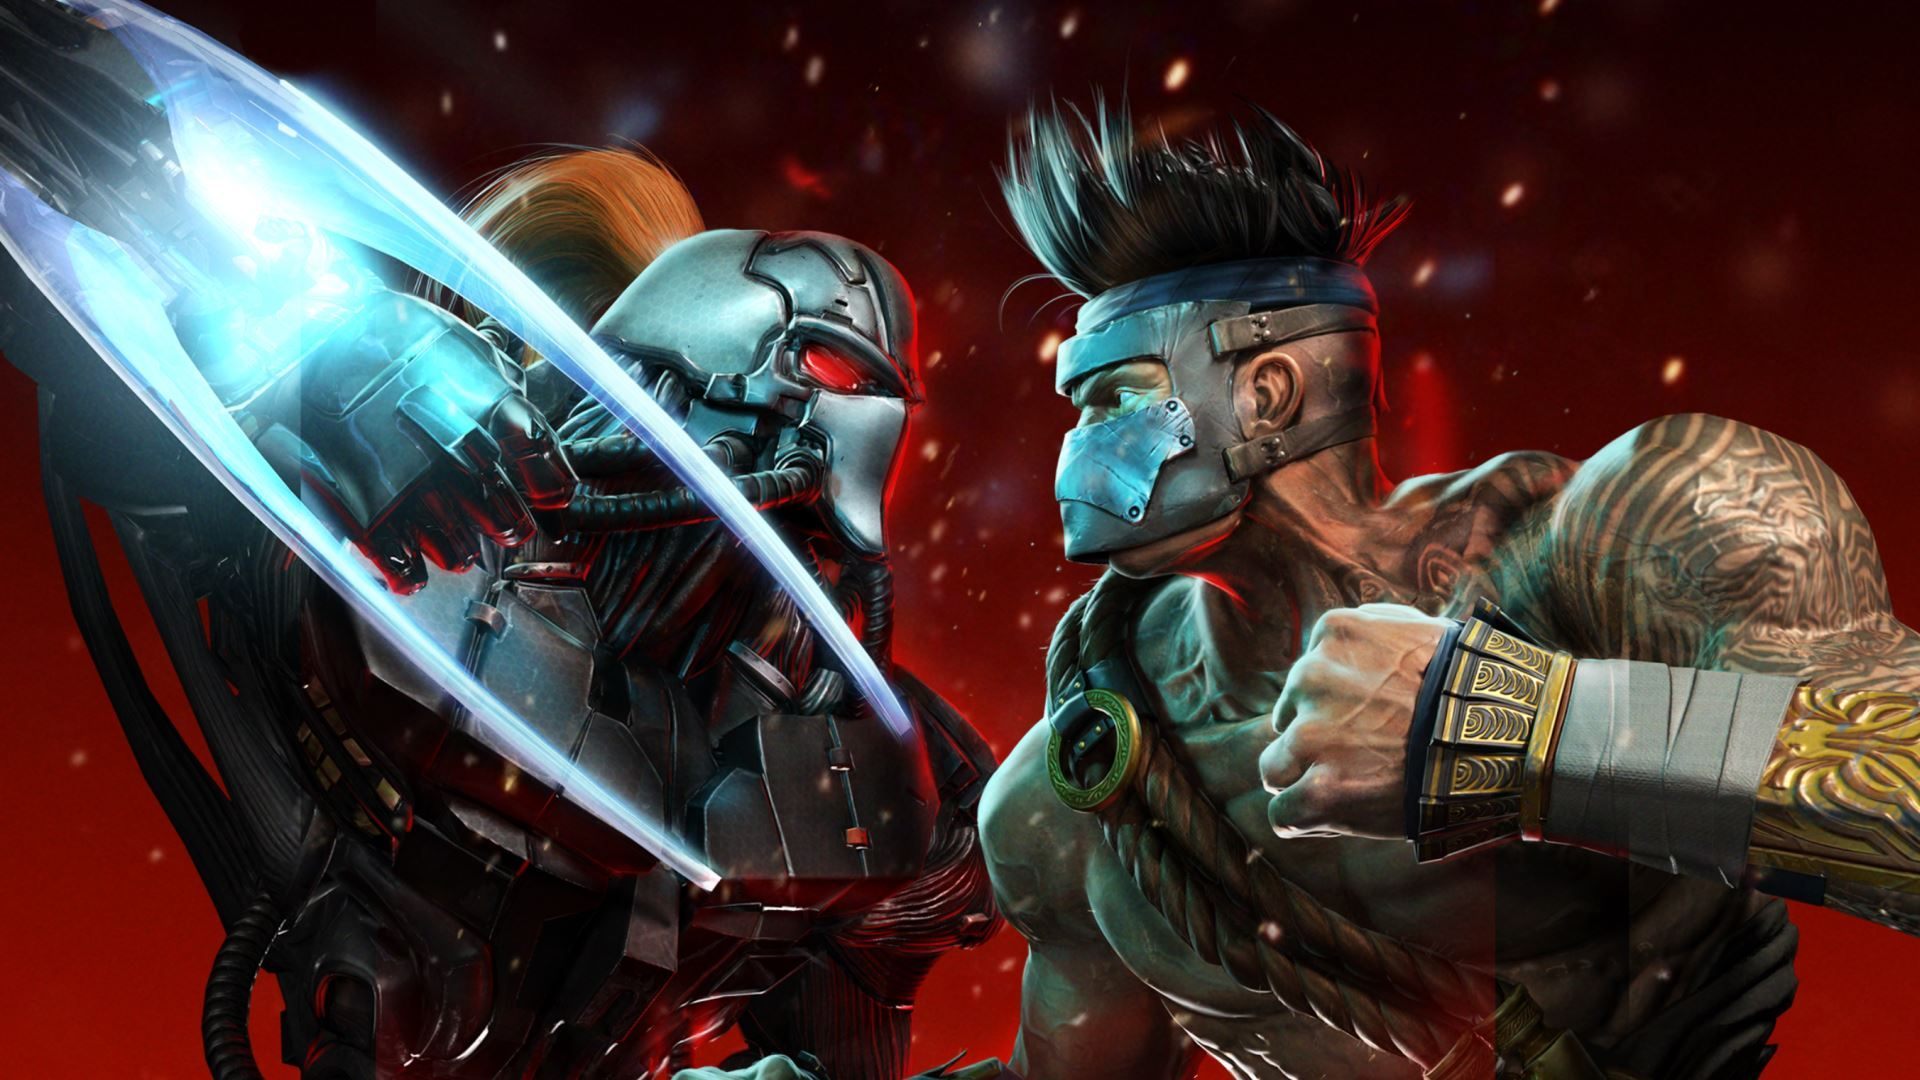 Killer Instinct appeared in the shop Windows Store two days ago, but again not without mishaps. Problems refresh the data synchronization between the PC and the console does not encourage a new service from Microsoft. - High update Windows 10 will introduce new features for gamers - news - 2016-03-31 